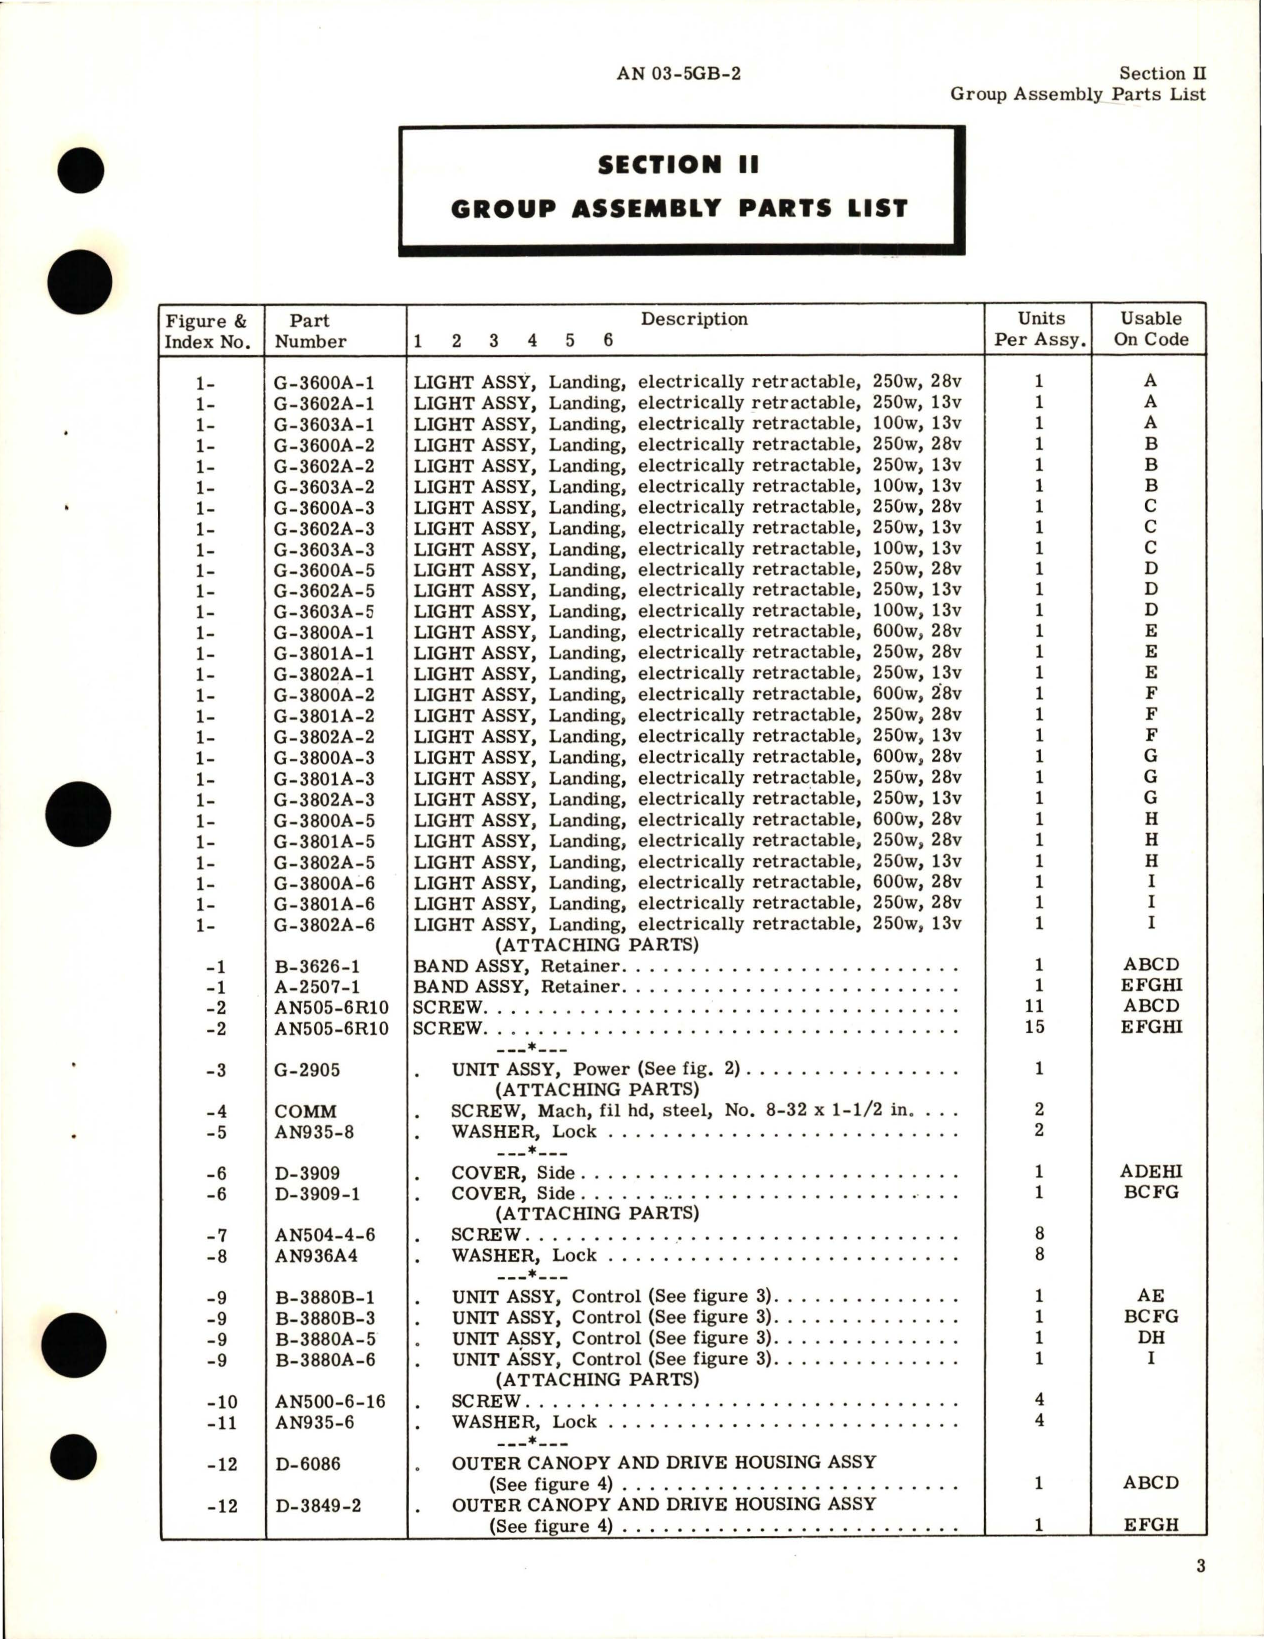 Sample page 7 from AirCorps Library document: Illustrated Parts Breakdown for Electrically Retractable Landing Lights